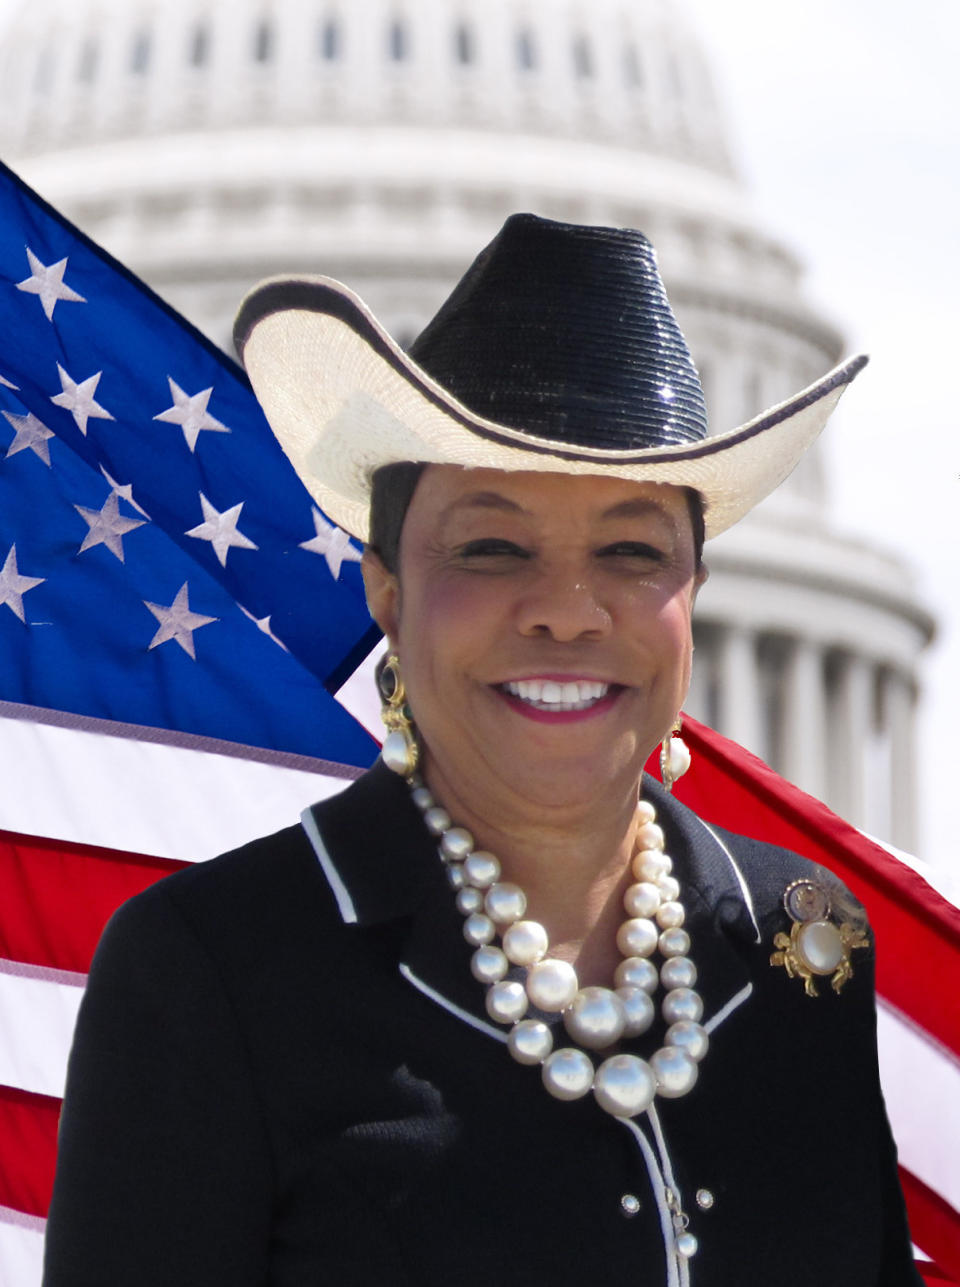 Rep. Frederica Wilson (D-Fla.) is rarely seen without one of her signature, colorful, wide-brimmed hats. She's even said she has <a href="http://www.huffingtonpost.com/2012/10/12/frederica-wilson-20-best-hats_n_1961656.html">hundreds of hats</a> in her collection. 